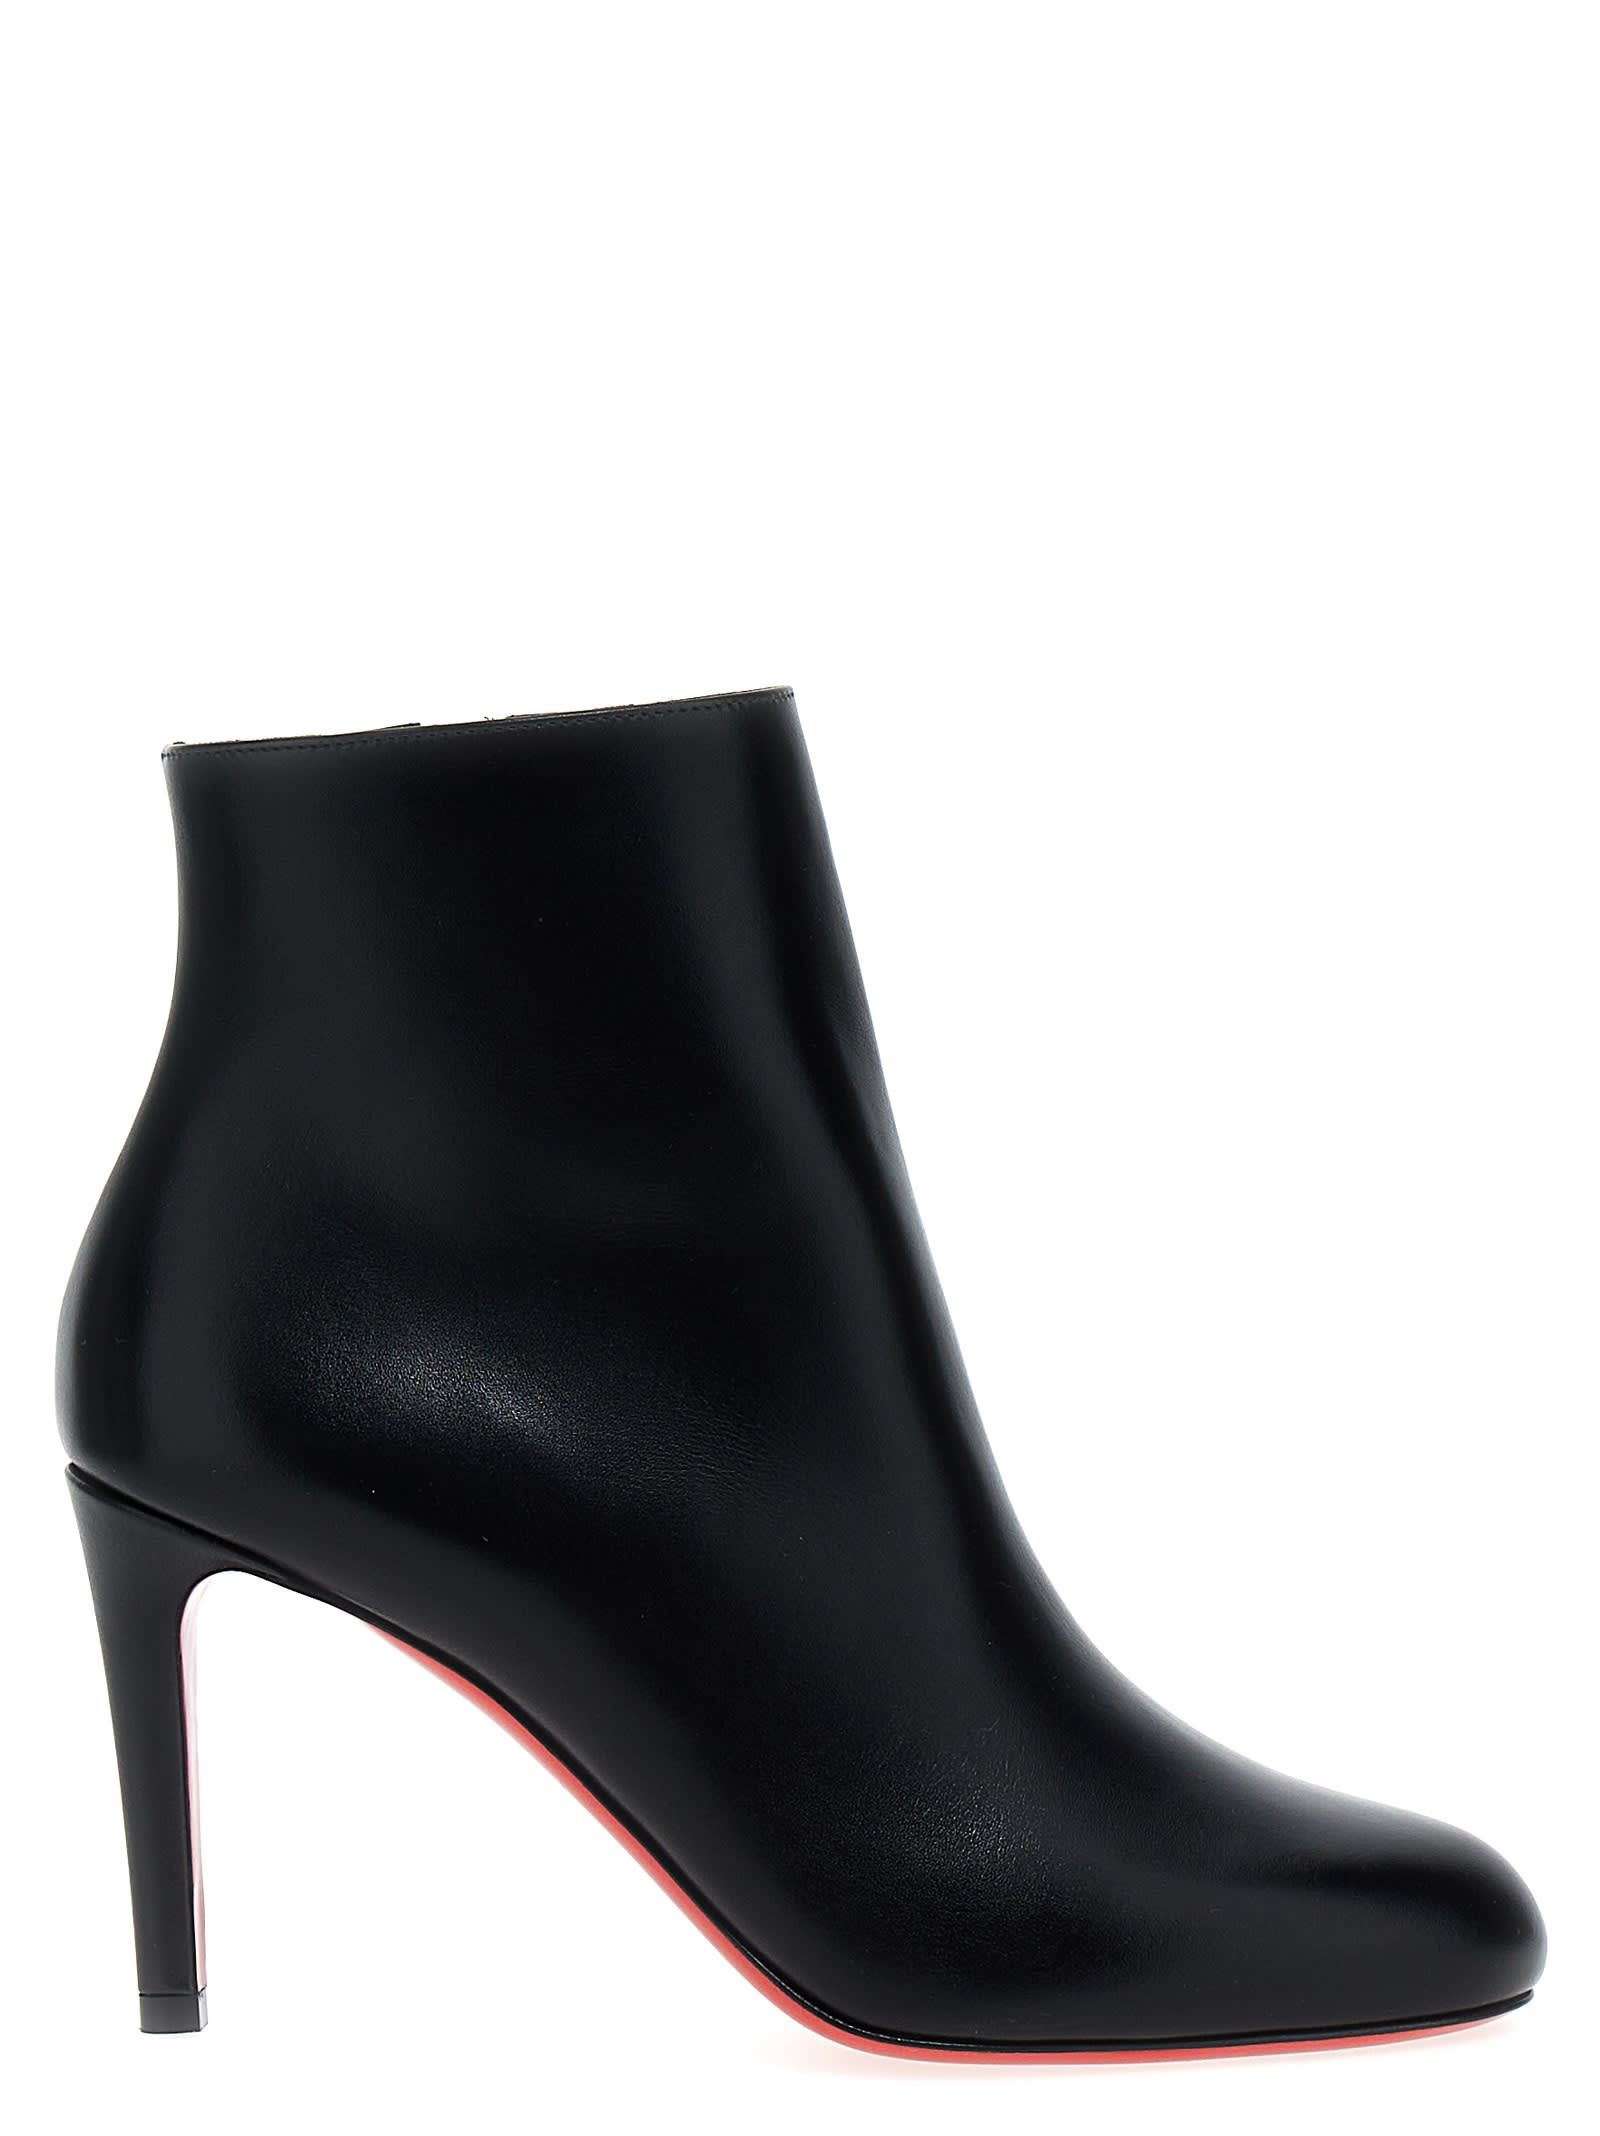 CHRISTIAN LOUBOUTIN PUMPPIE ANKLE BOOTS